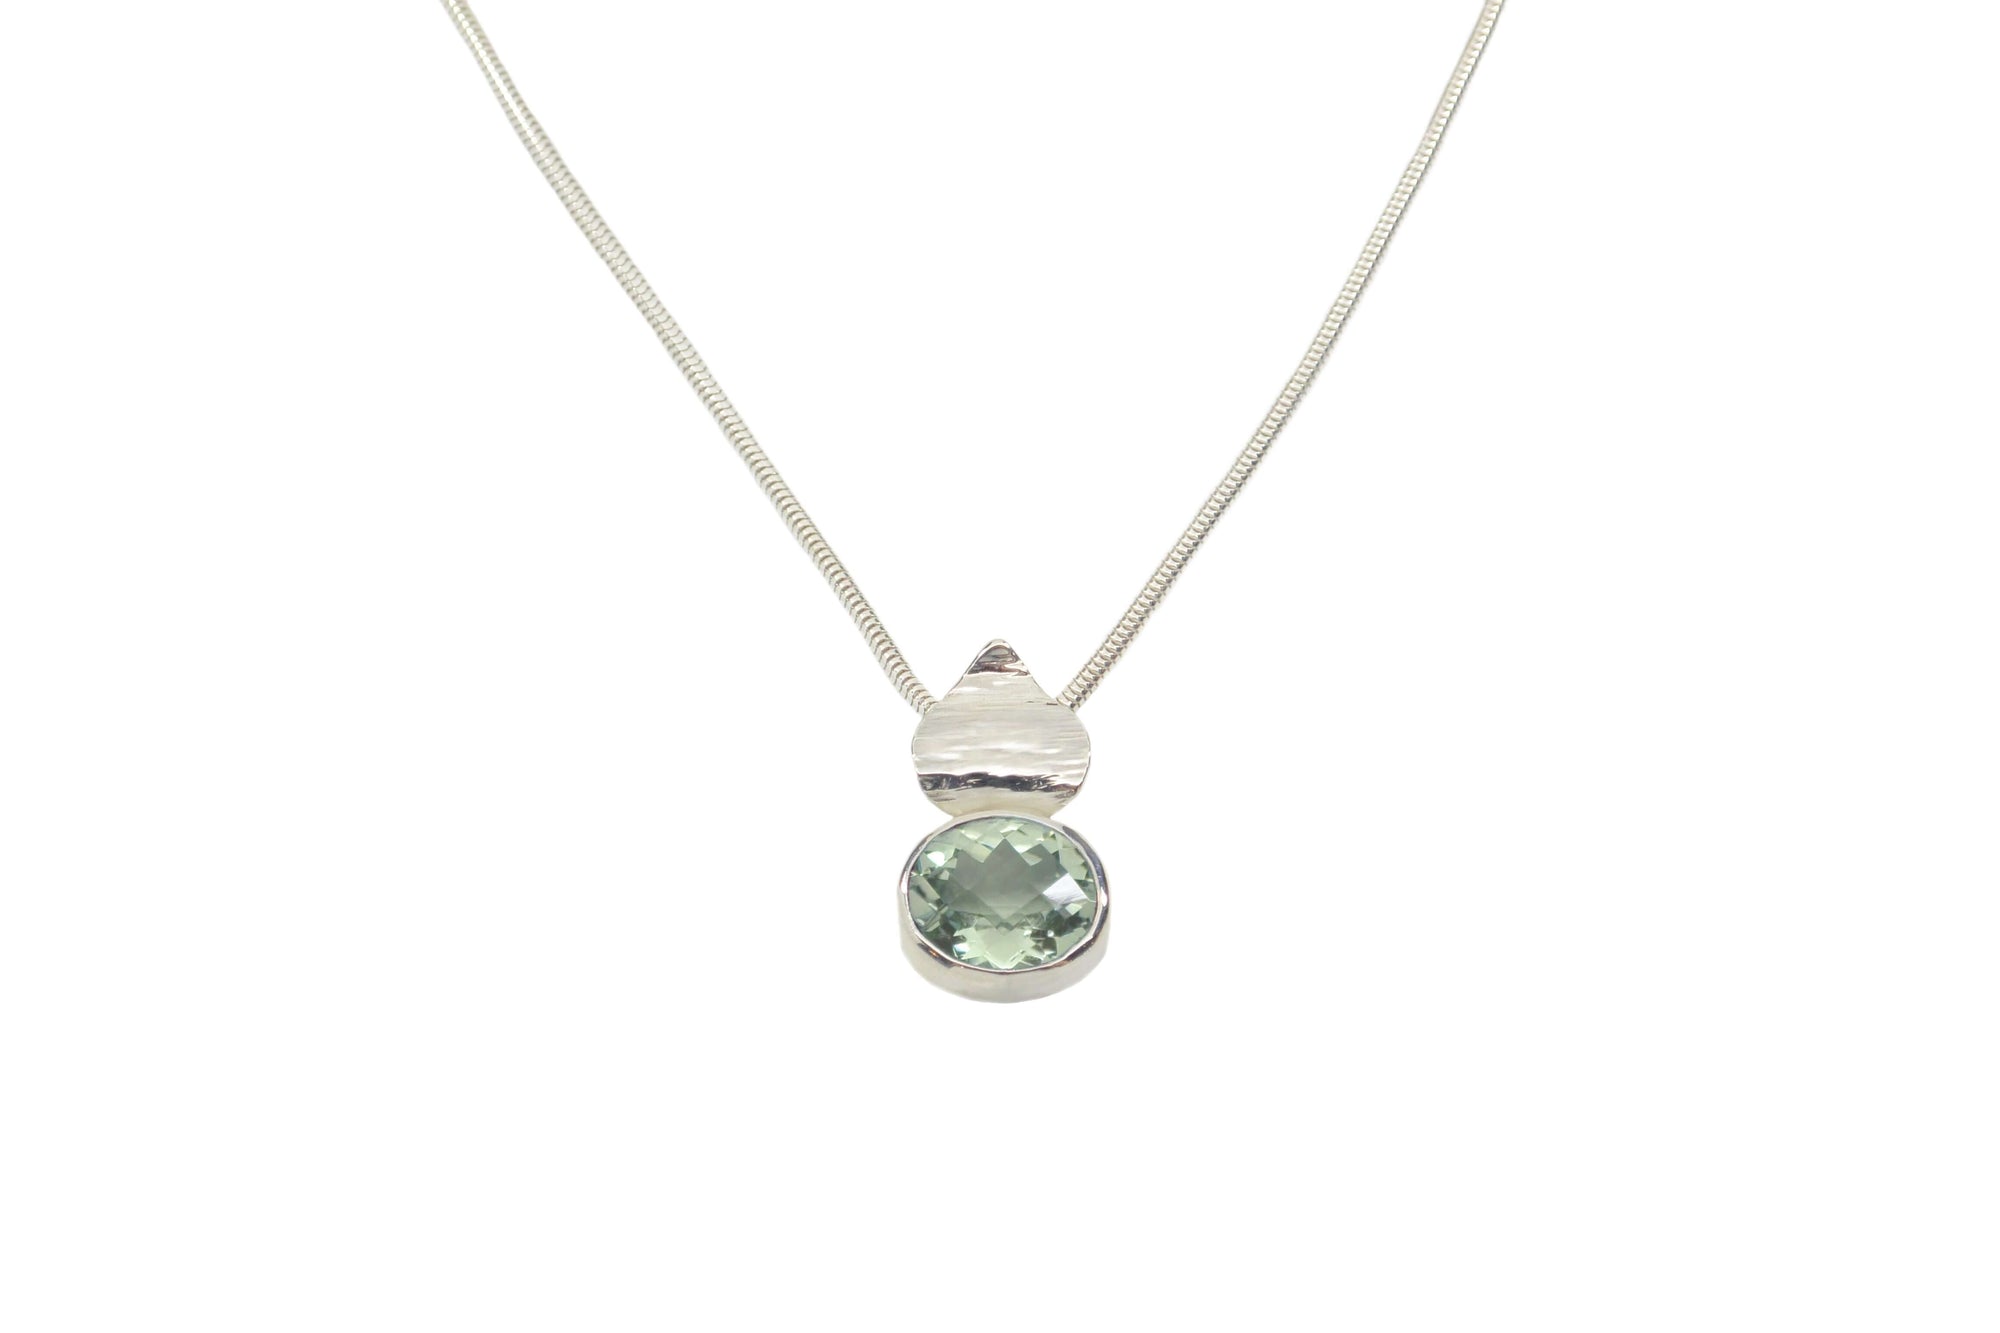 A handmade sterling silver prasiolite pendant necklace on a silver chain